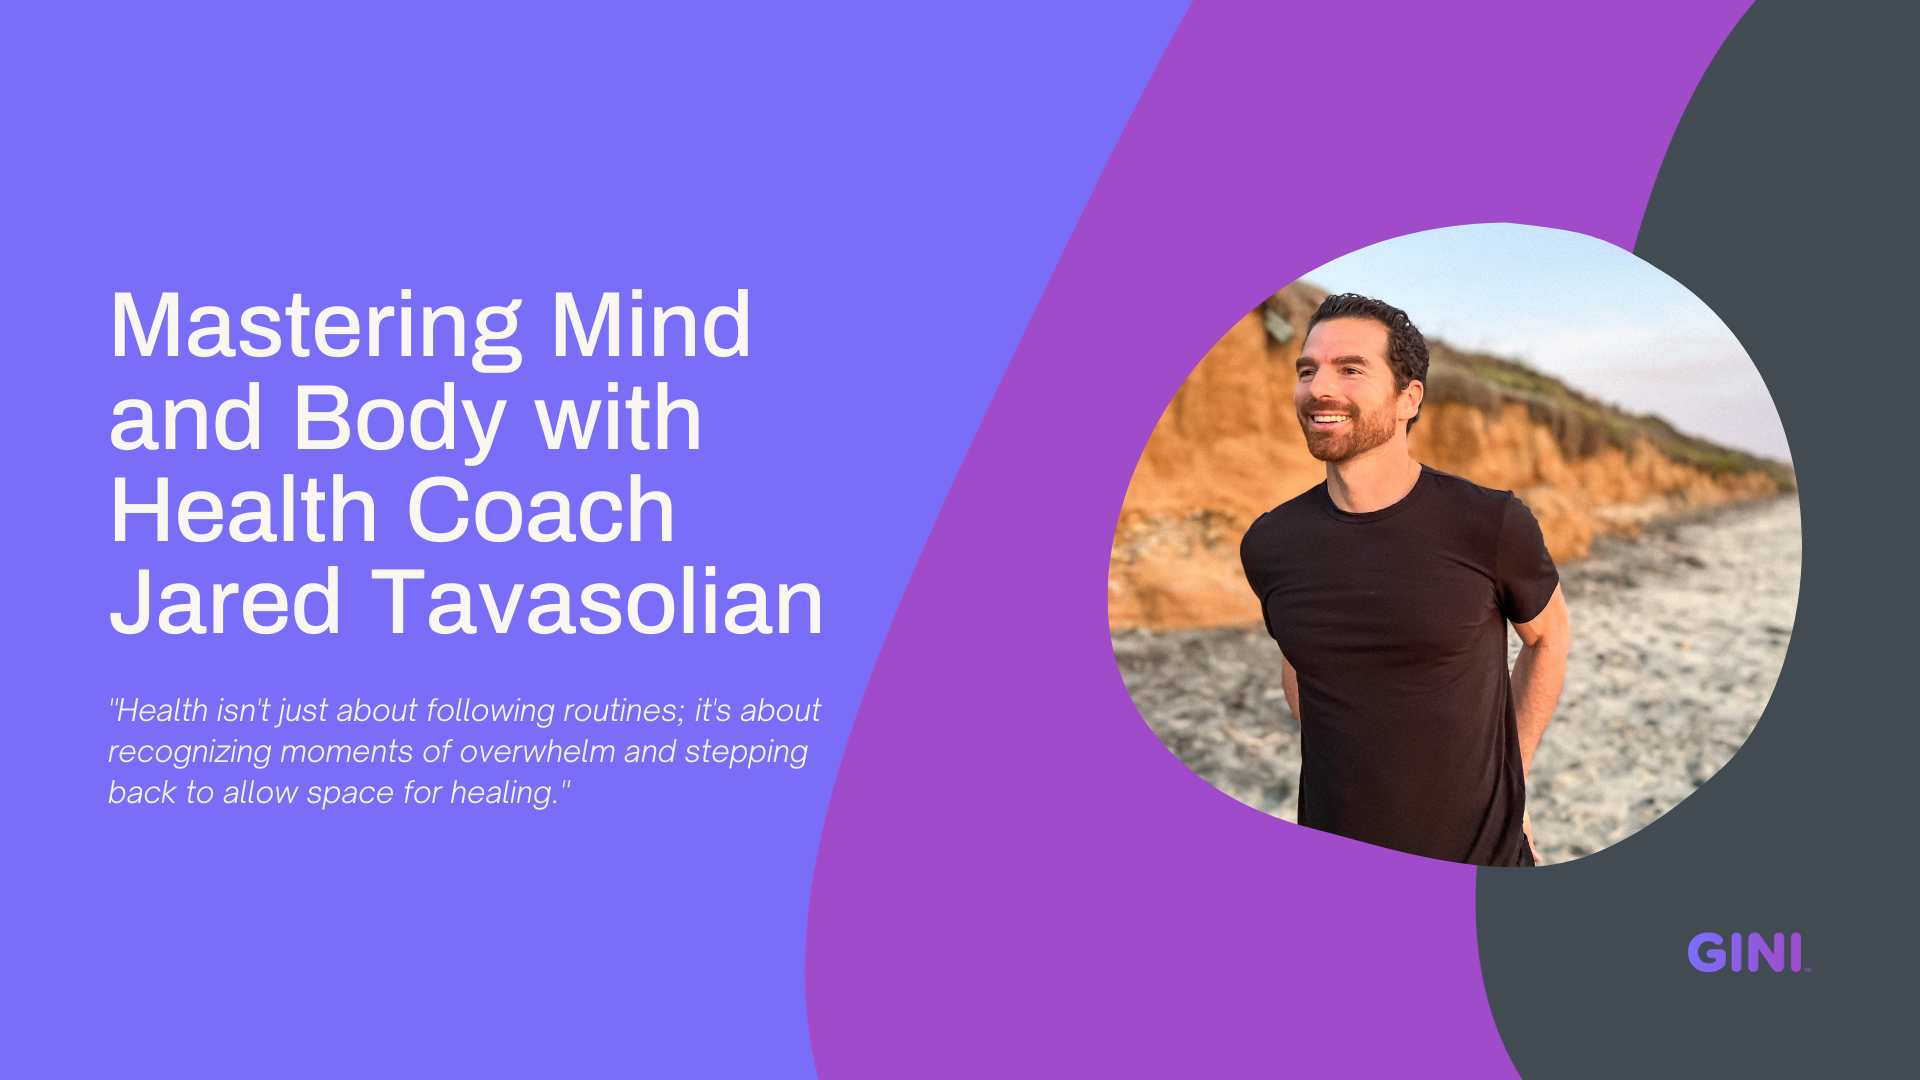 health coach mastering mind and body for fitness, health, wellbeing and weight loss.